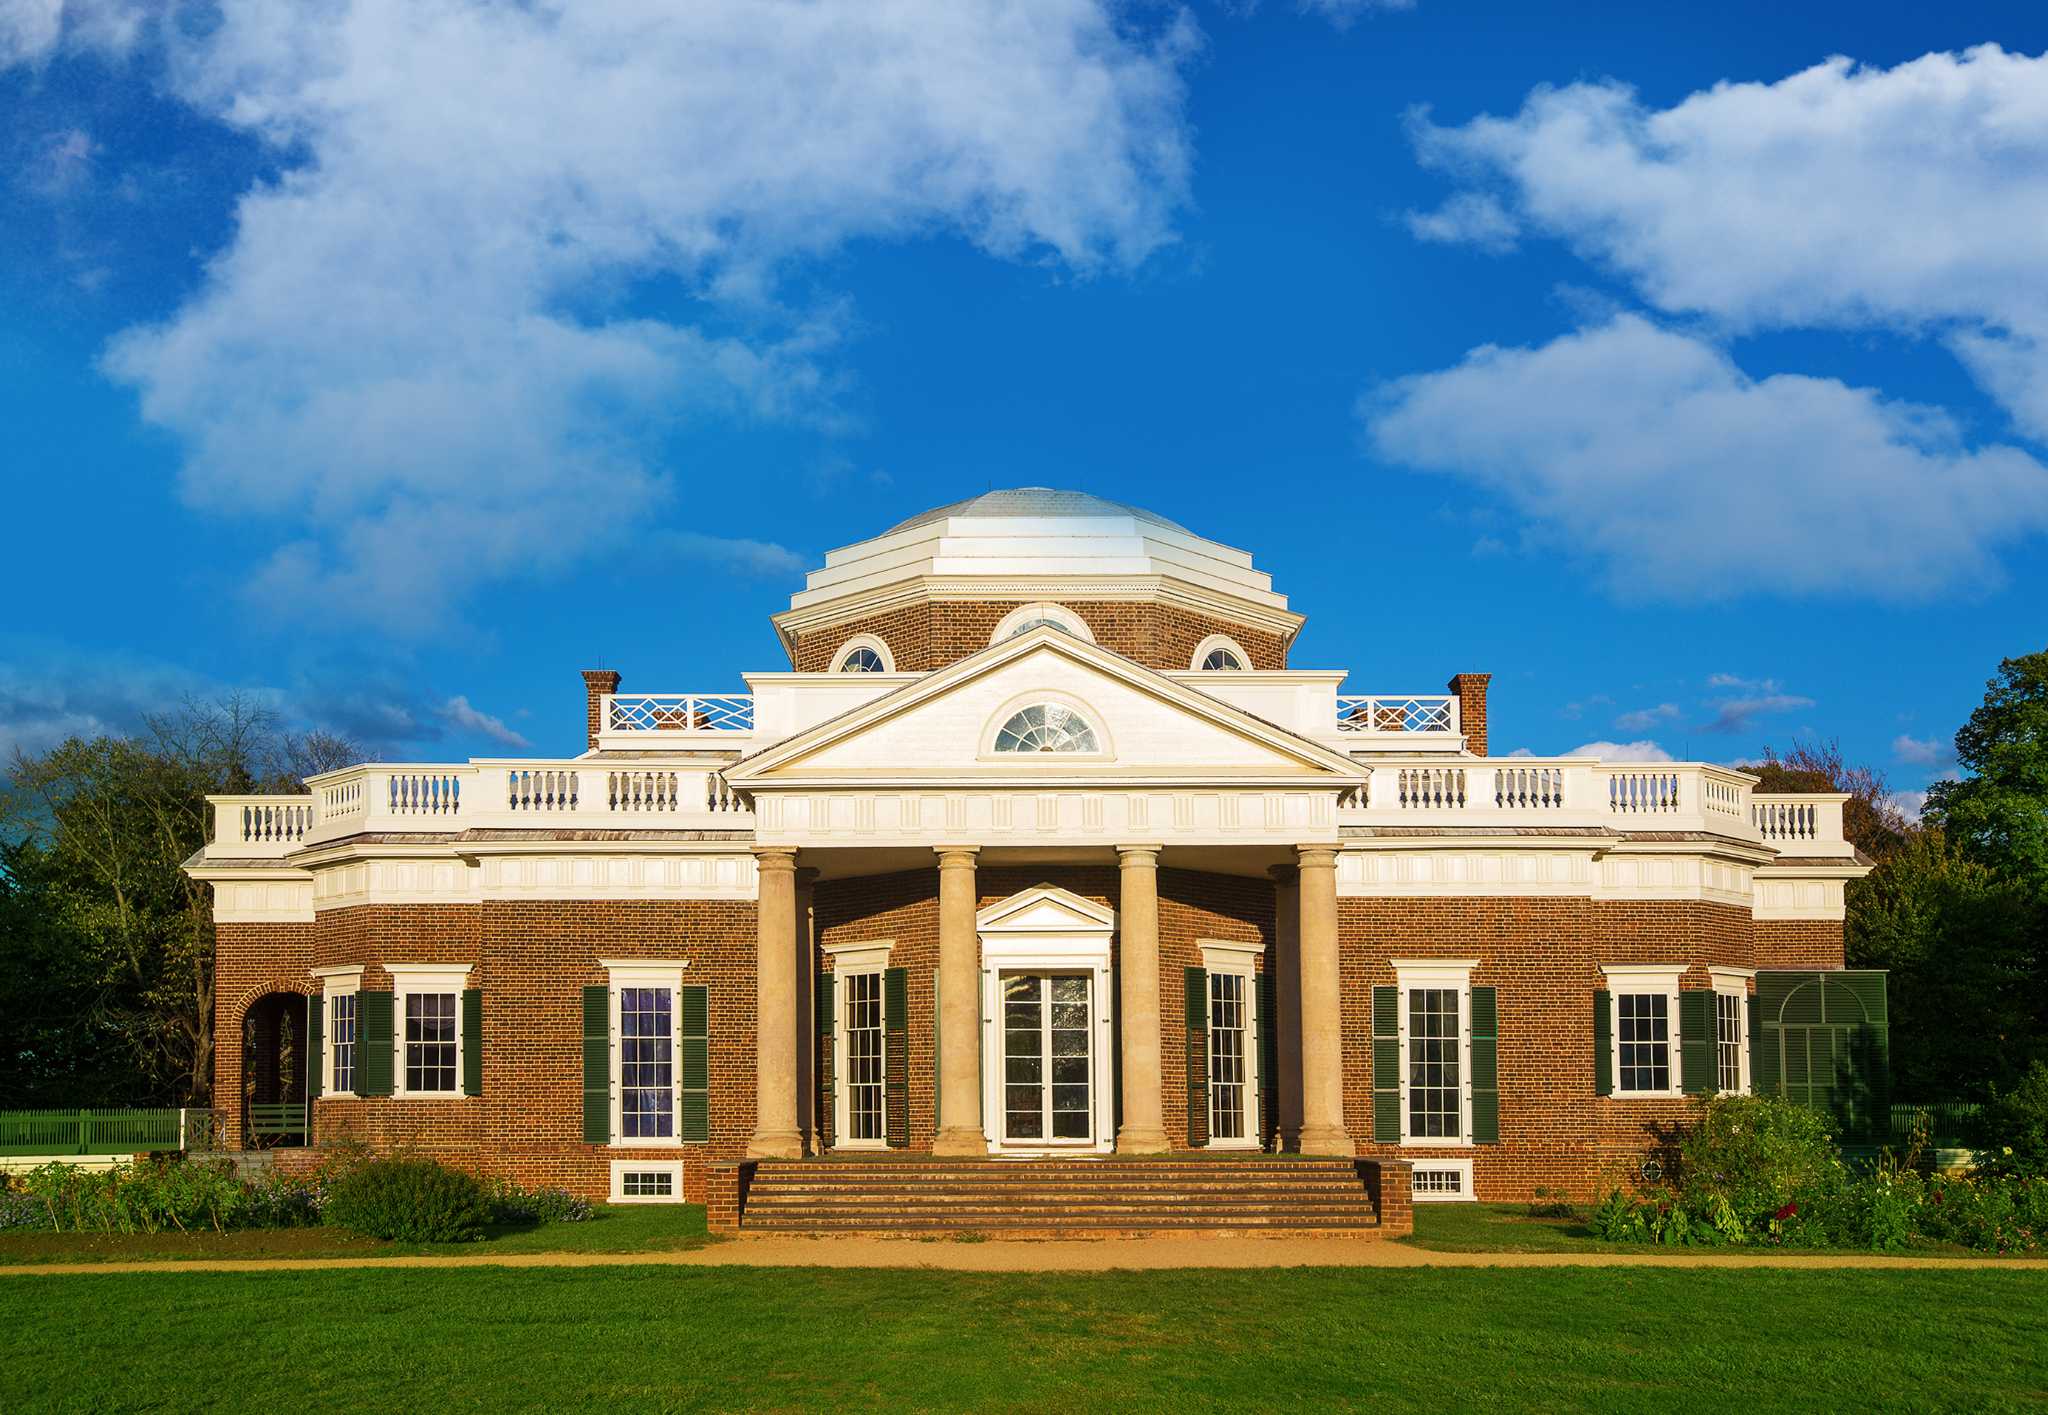 Jefferson's Monticello finally gives Sally Hemings her place in presidential history ...2048 x 1415